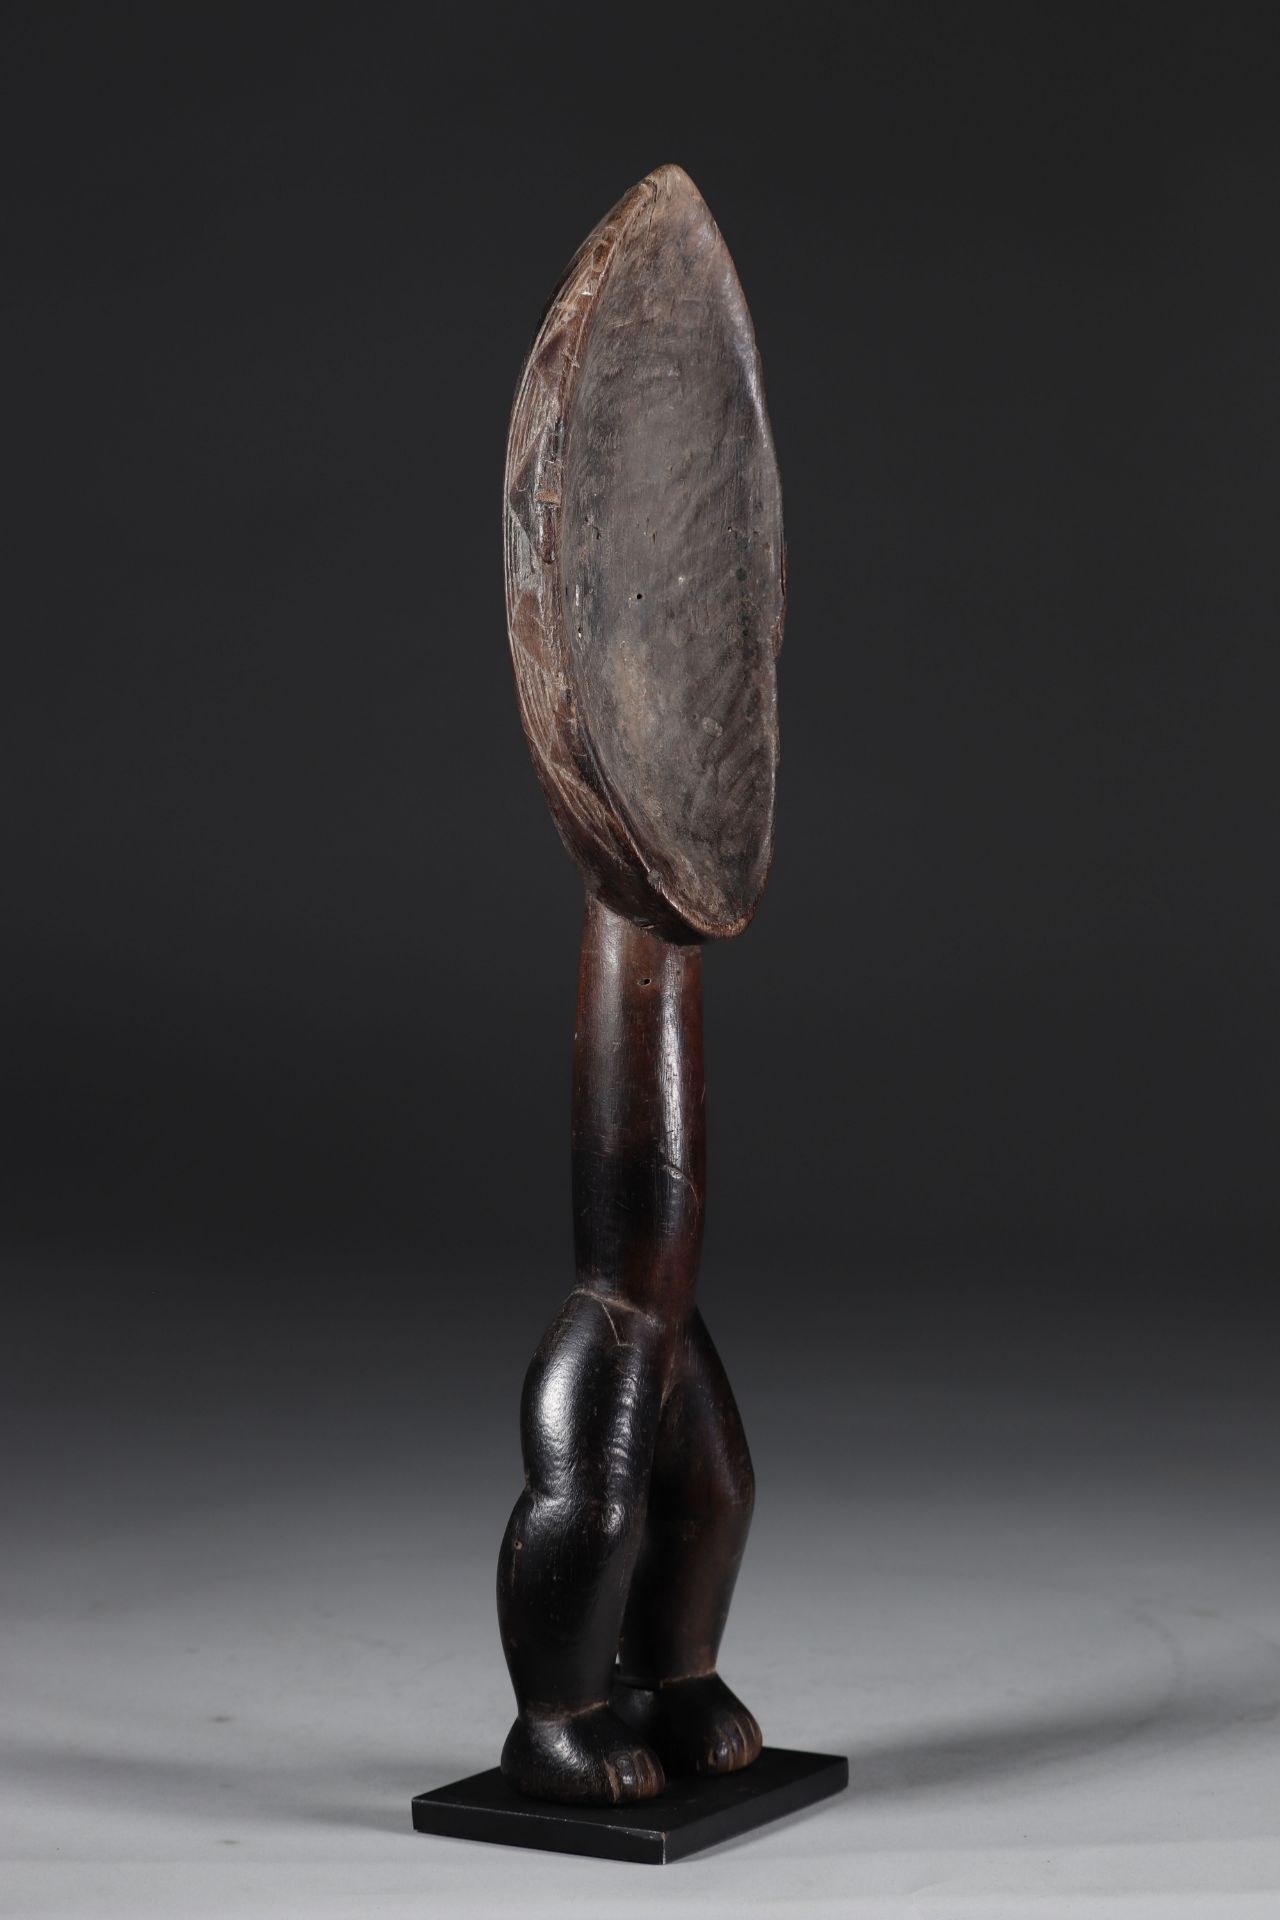 Ceremonial spoon Dan early 20th century beautiful patina - private collection Belgium - Image 2 of 6